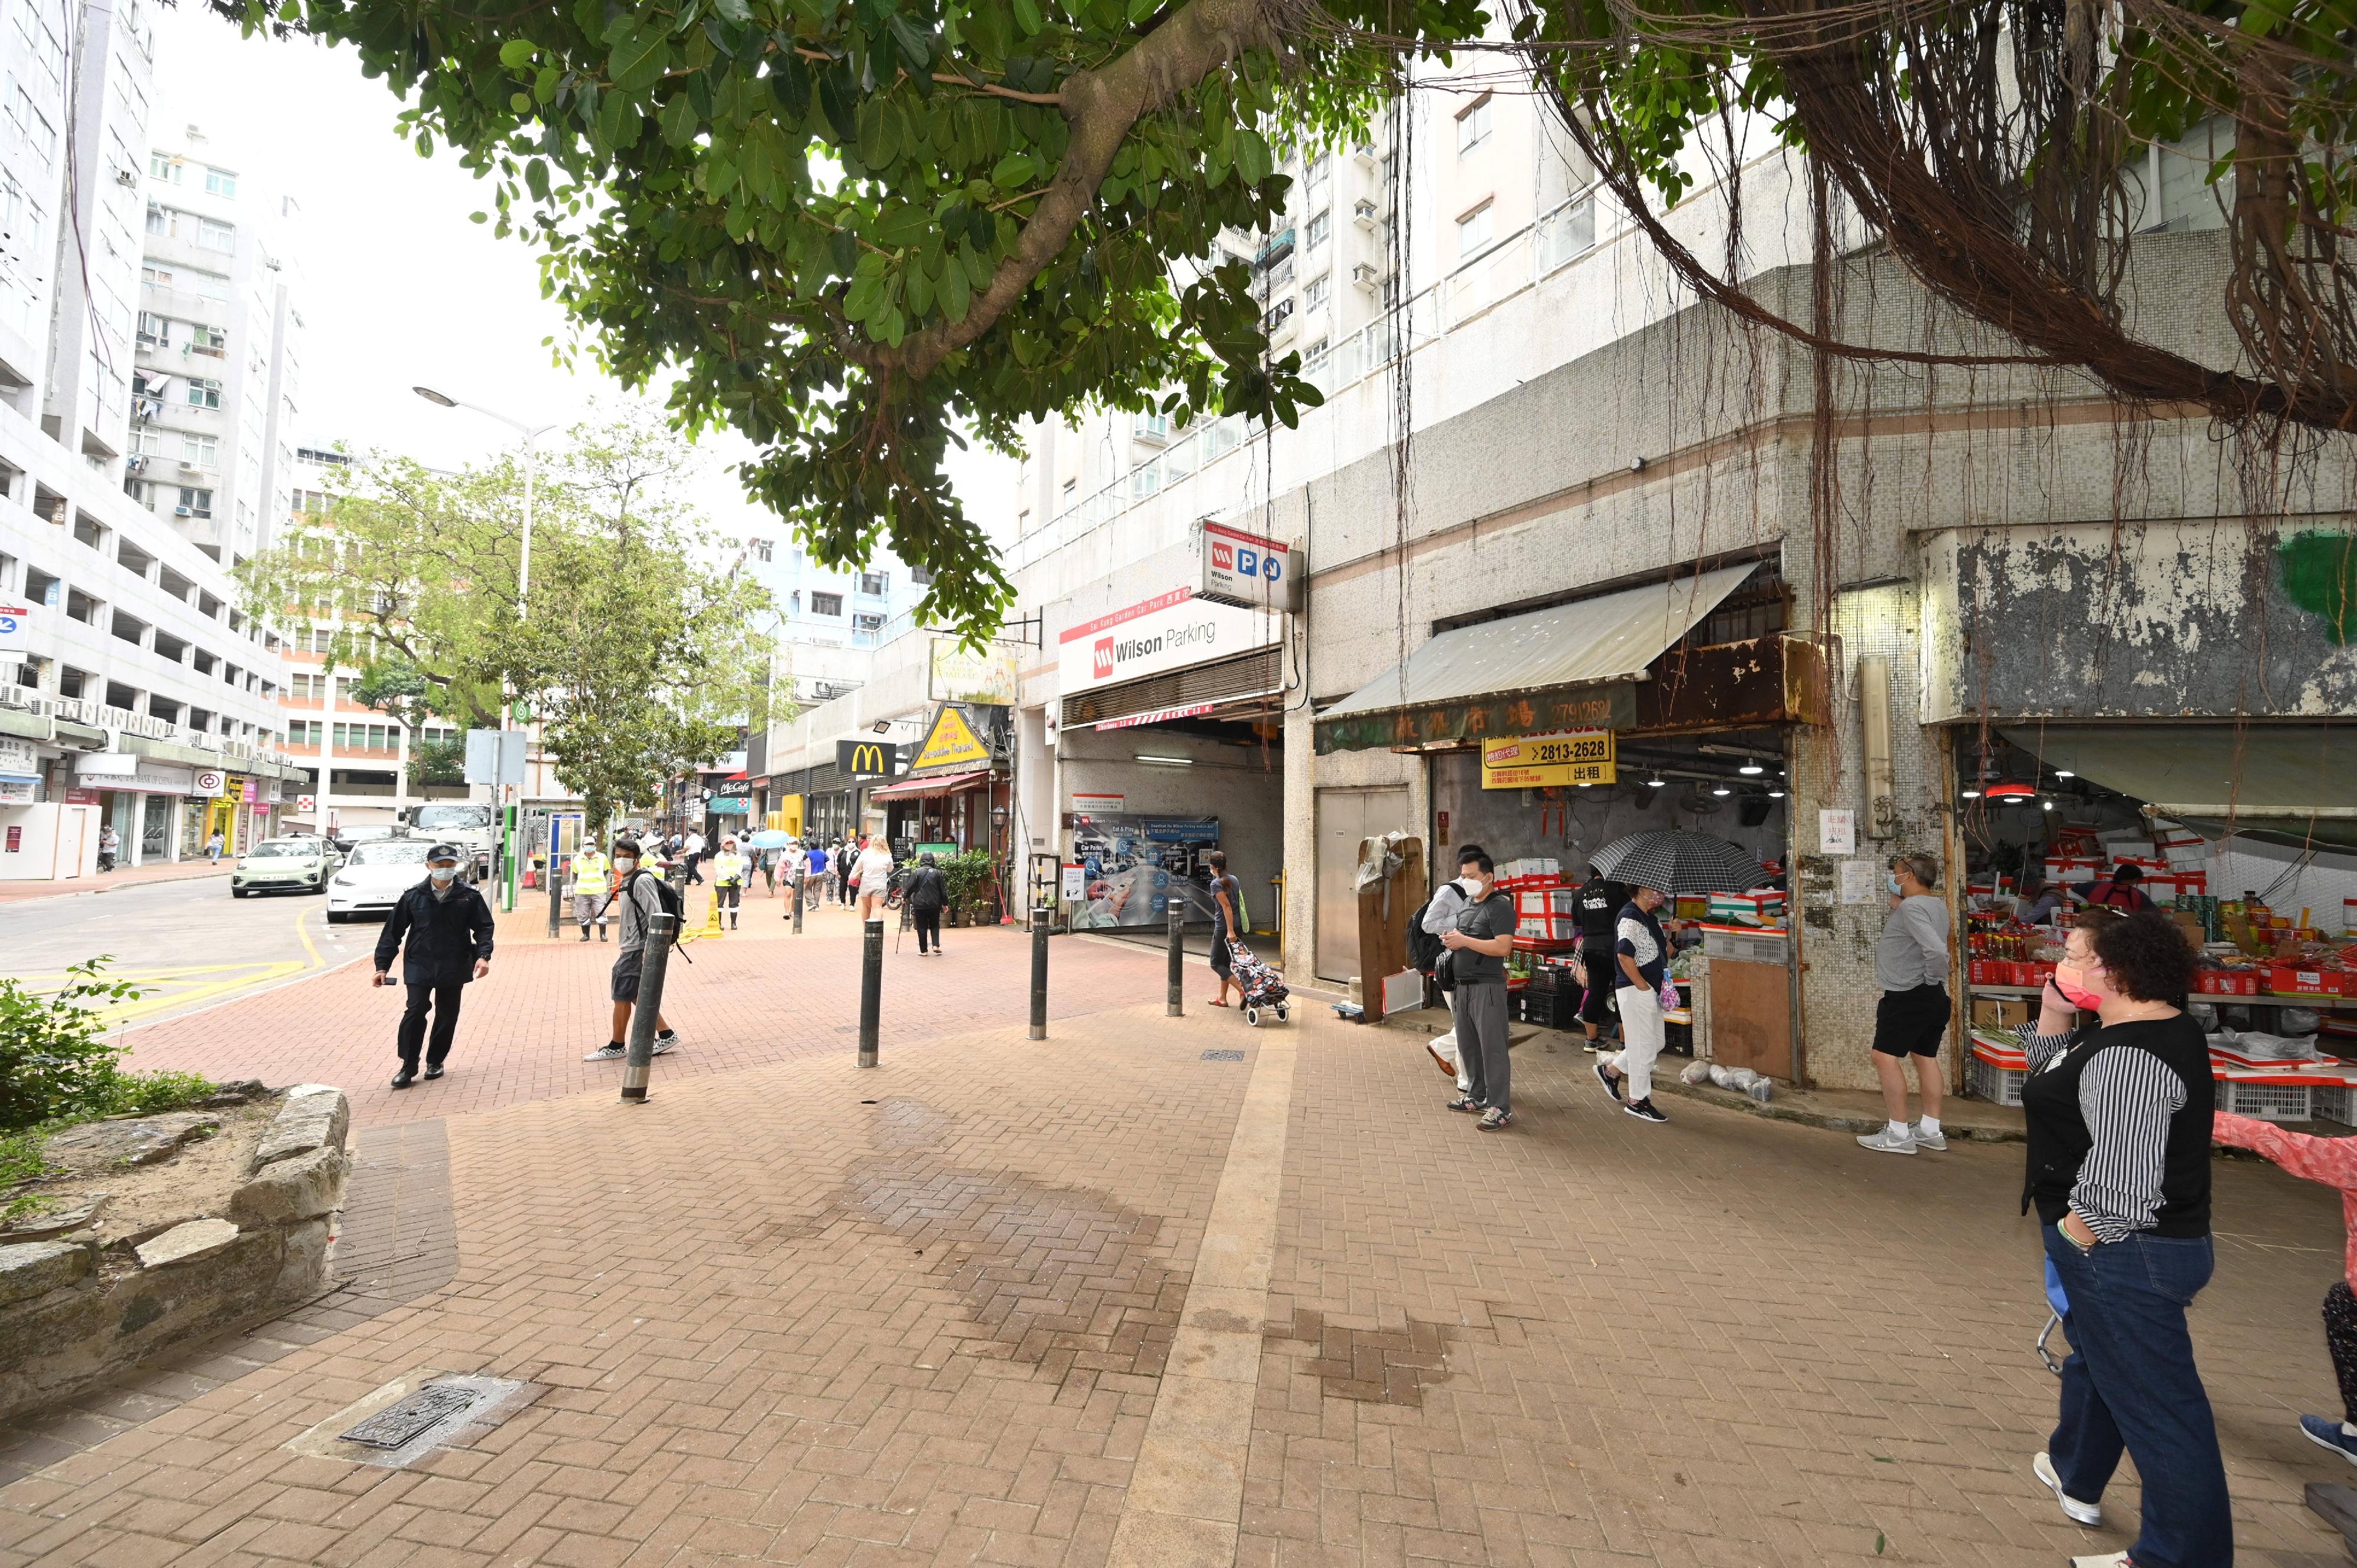 A spokesman for the Food and Environmental Hygiene Department (FEHD) said today (October 24) that the FEHD and the Hong Kong Police Force have conducted a series of stringent enforcement actions against illegal shop front extension activities in various districts since October 3. Photo shows the condition of a street in Sai Kung District after a joint operation.
